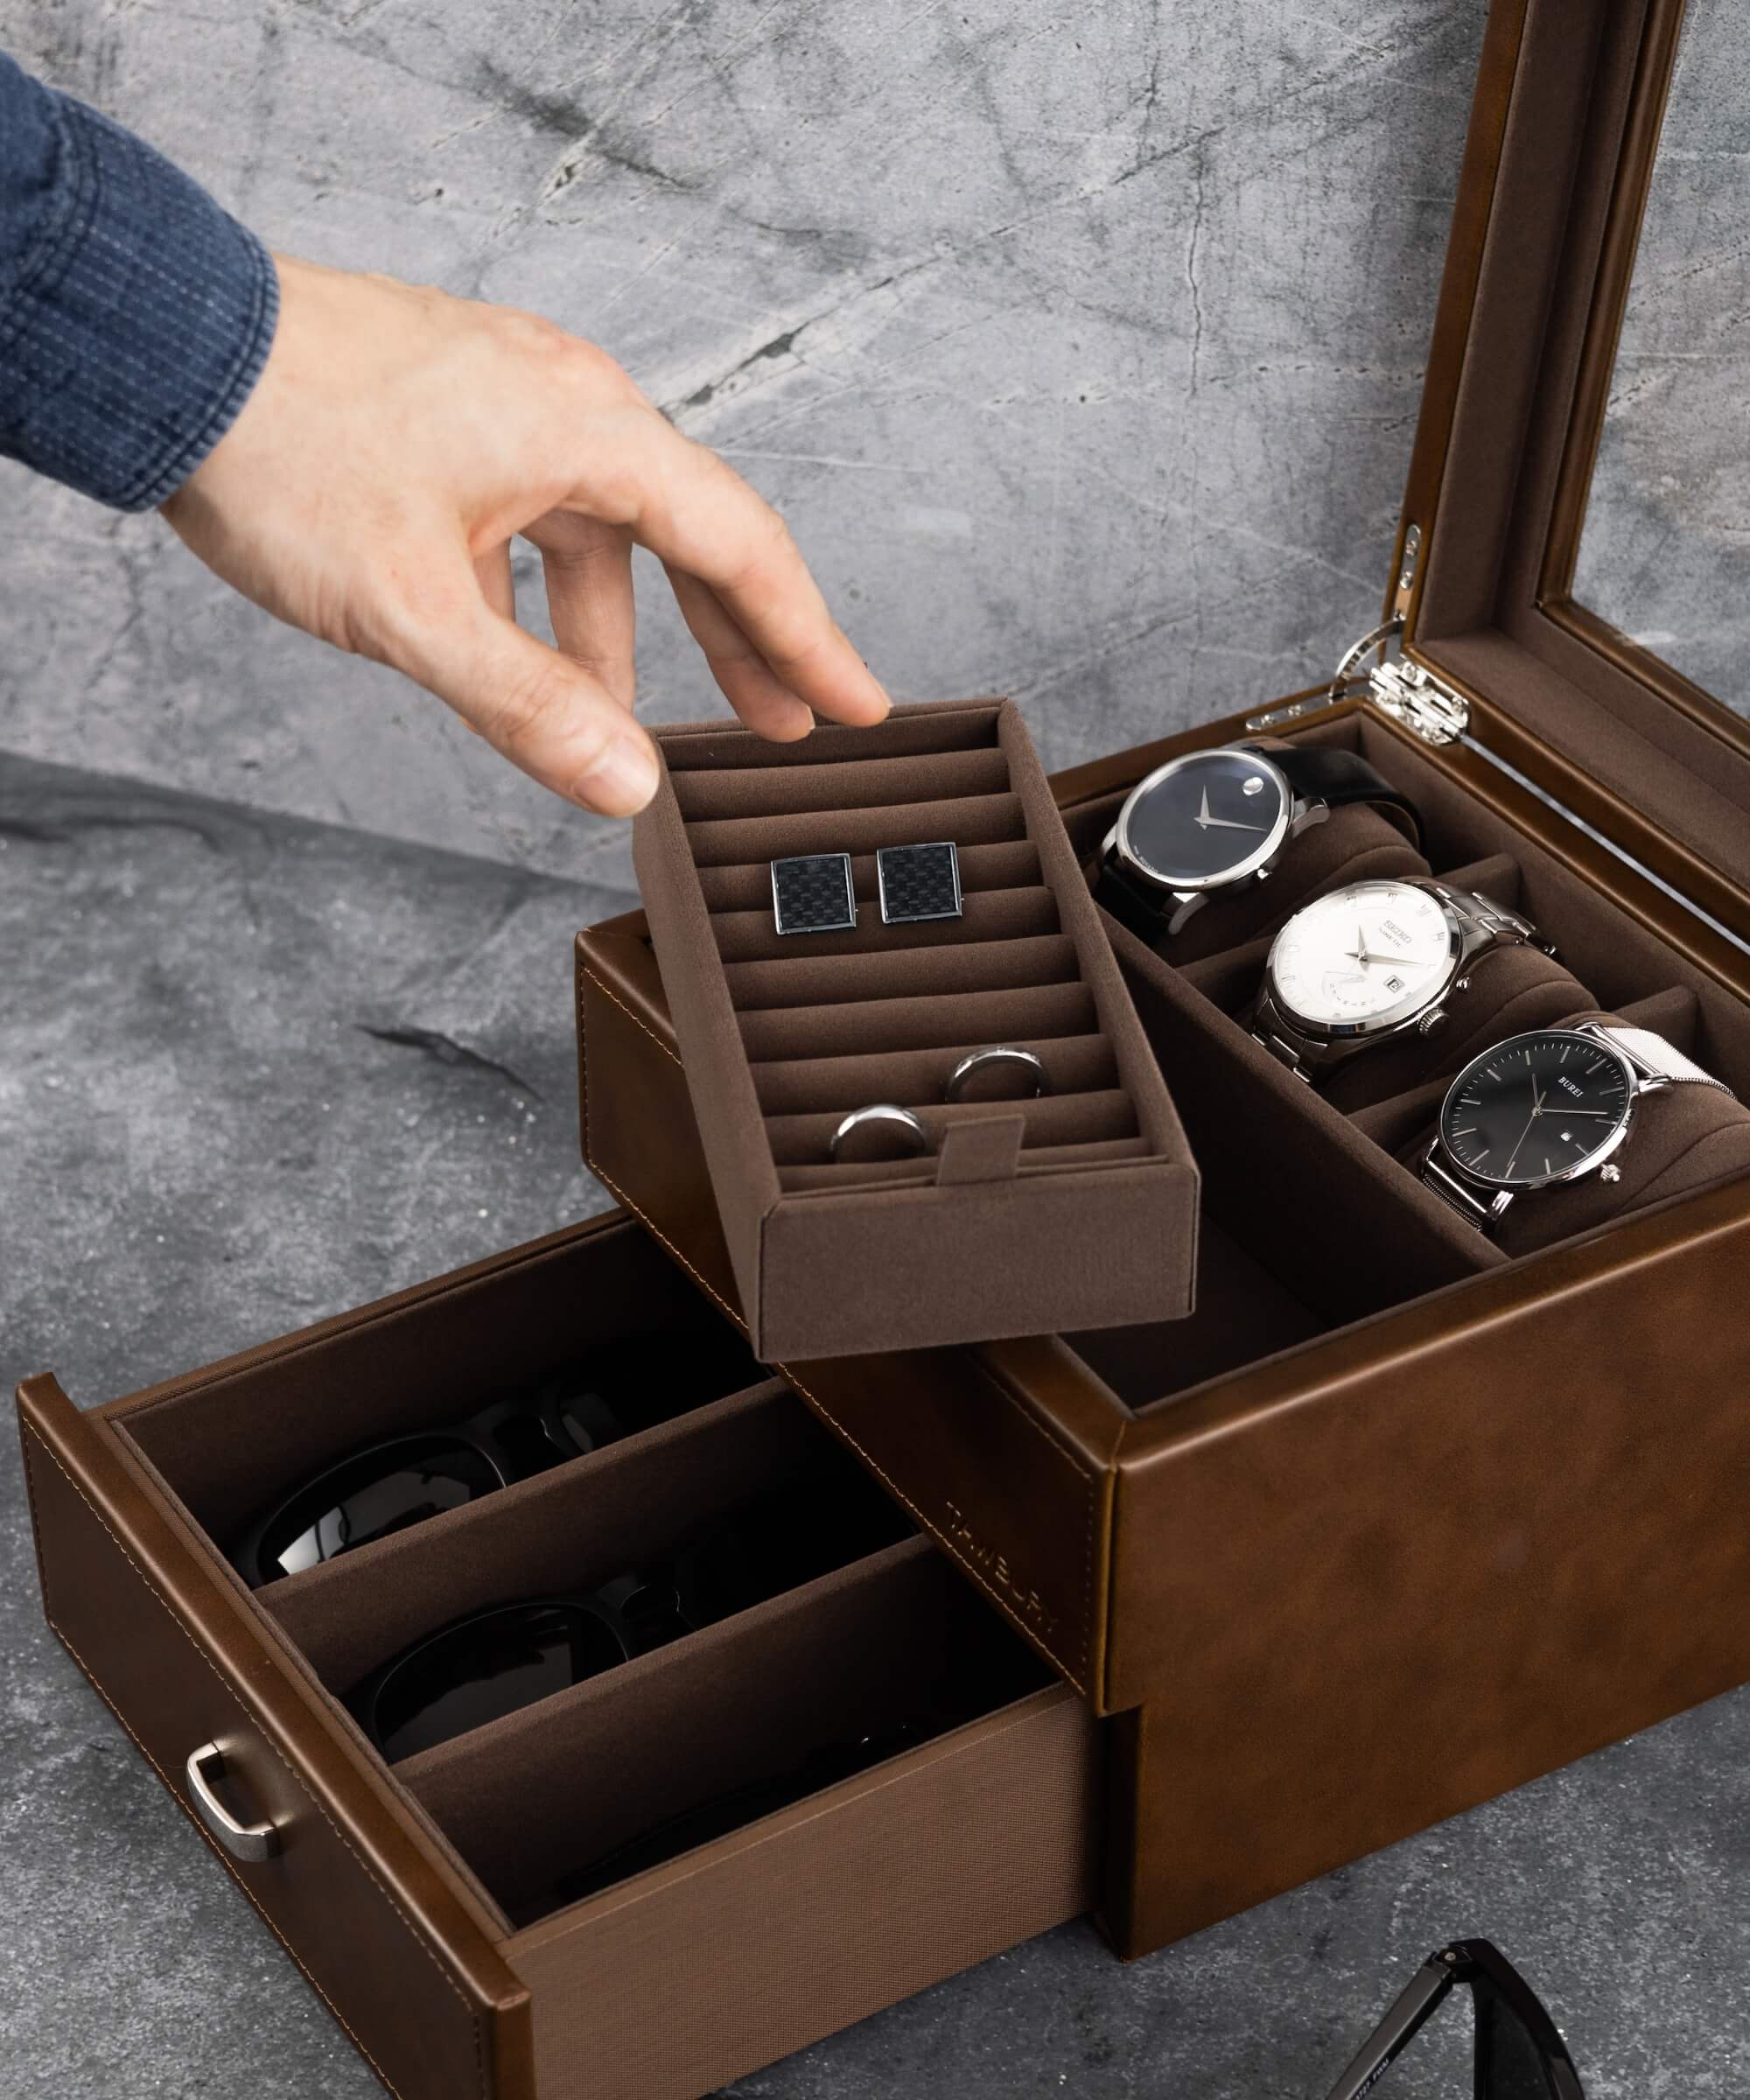 A person is opening a TAWBURY Bayswater 3 Watch Jewellery Box - Brown.